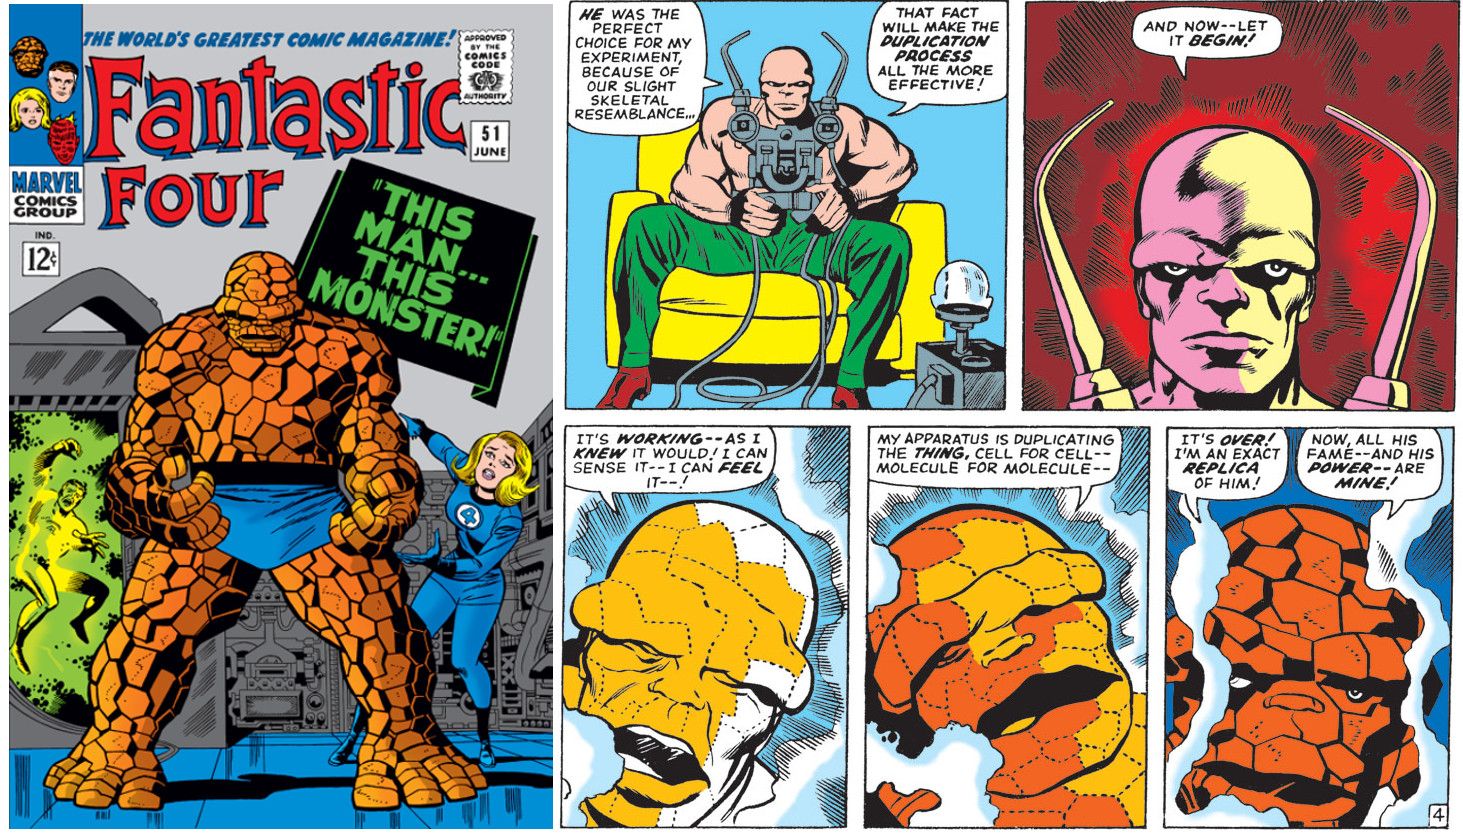 The Thing Impostor Fantastic Four #51